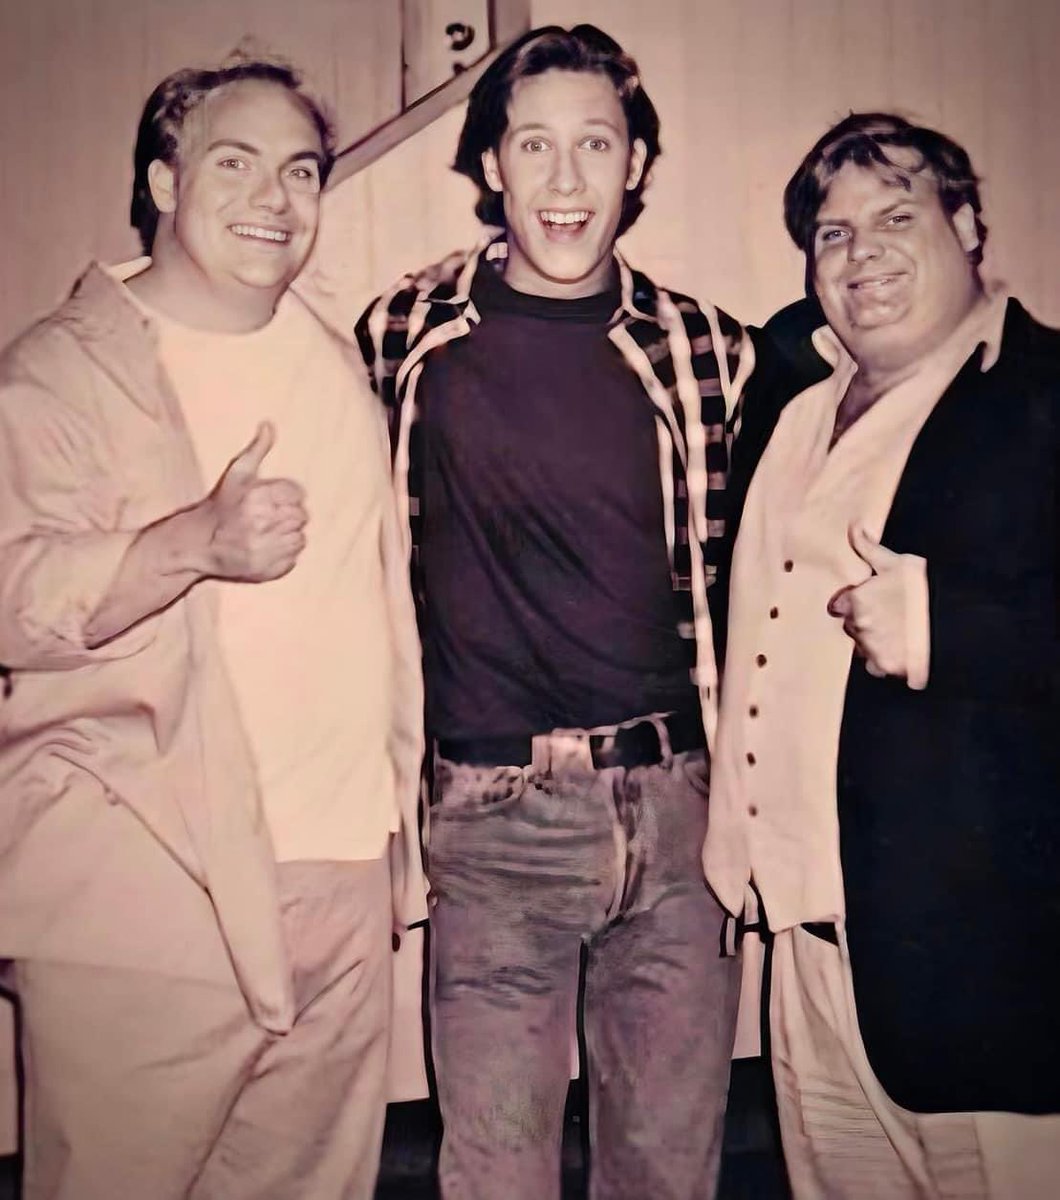 Loved Chris Farley, Beloved, loud, energetic, very gifted and talented gone too soon at a very young age. Love this photo of @michaelrosenbum with Chris. #MichaelRosenbaum #ChrisFarley #comedian #Smile #laughter #MentalHealthAwareness